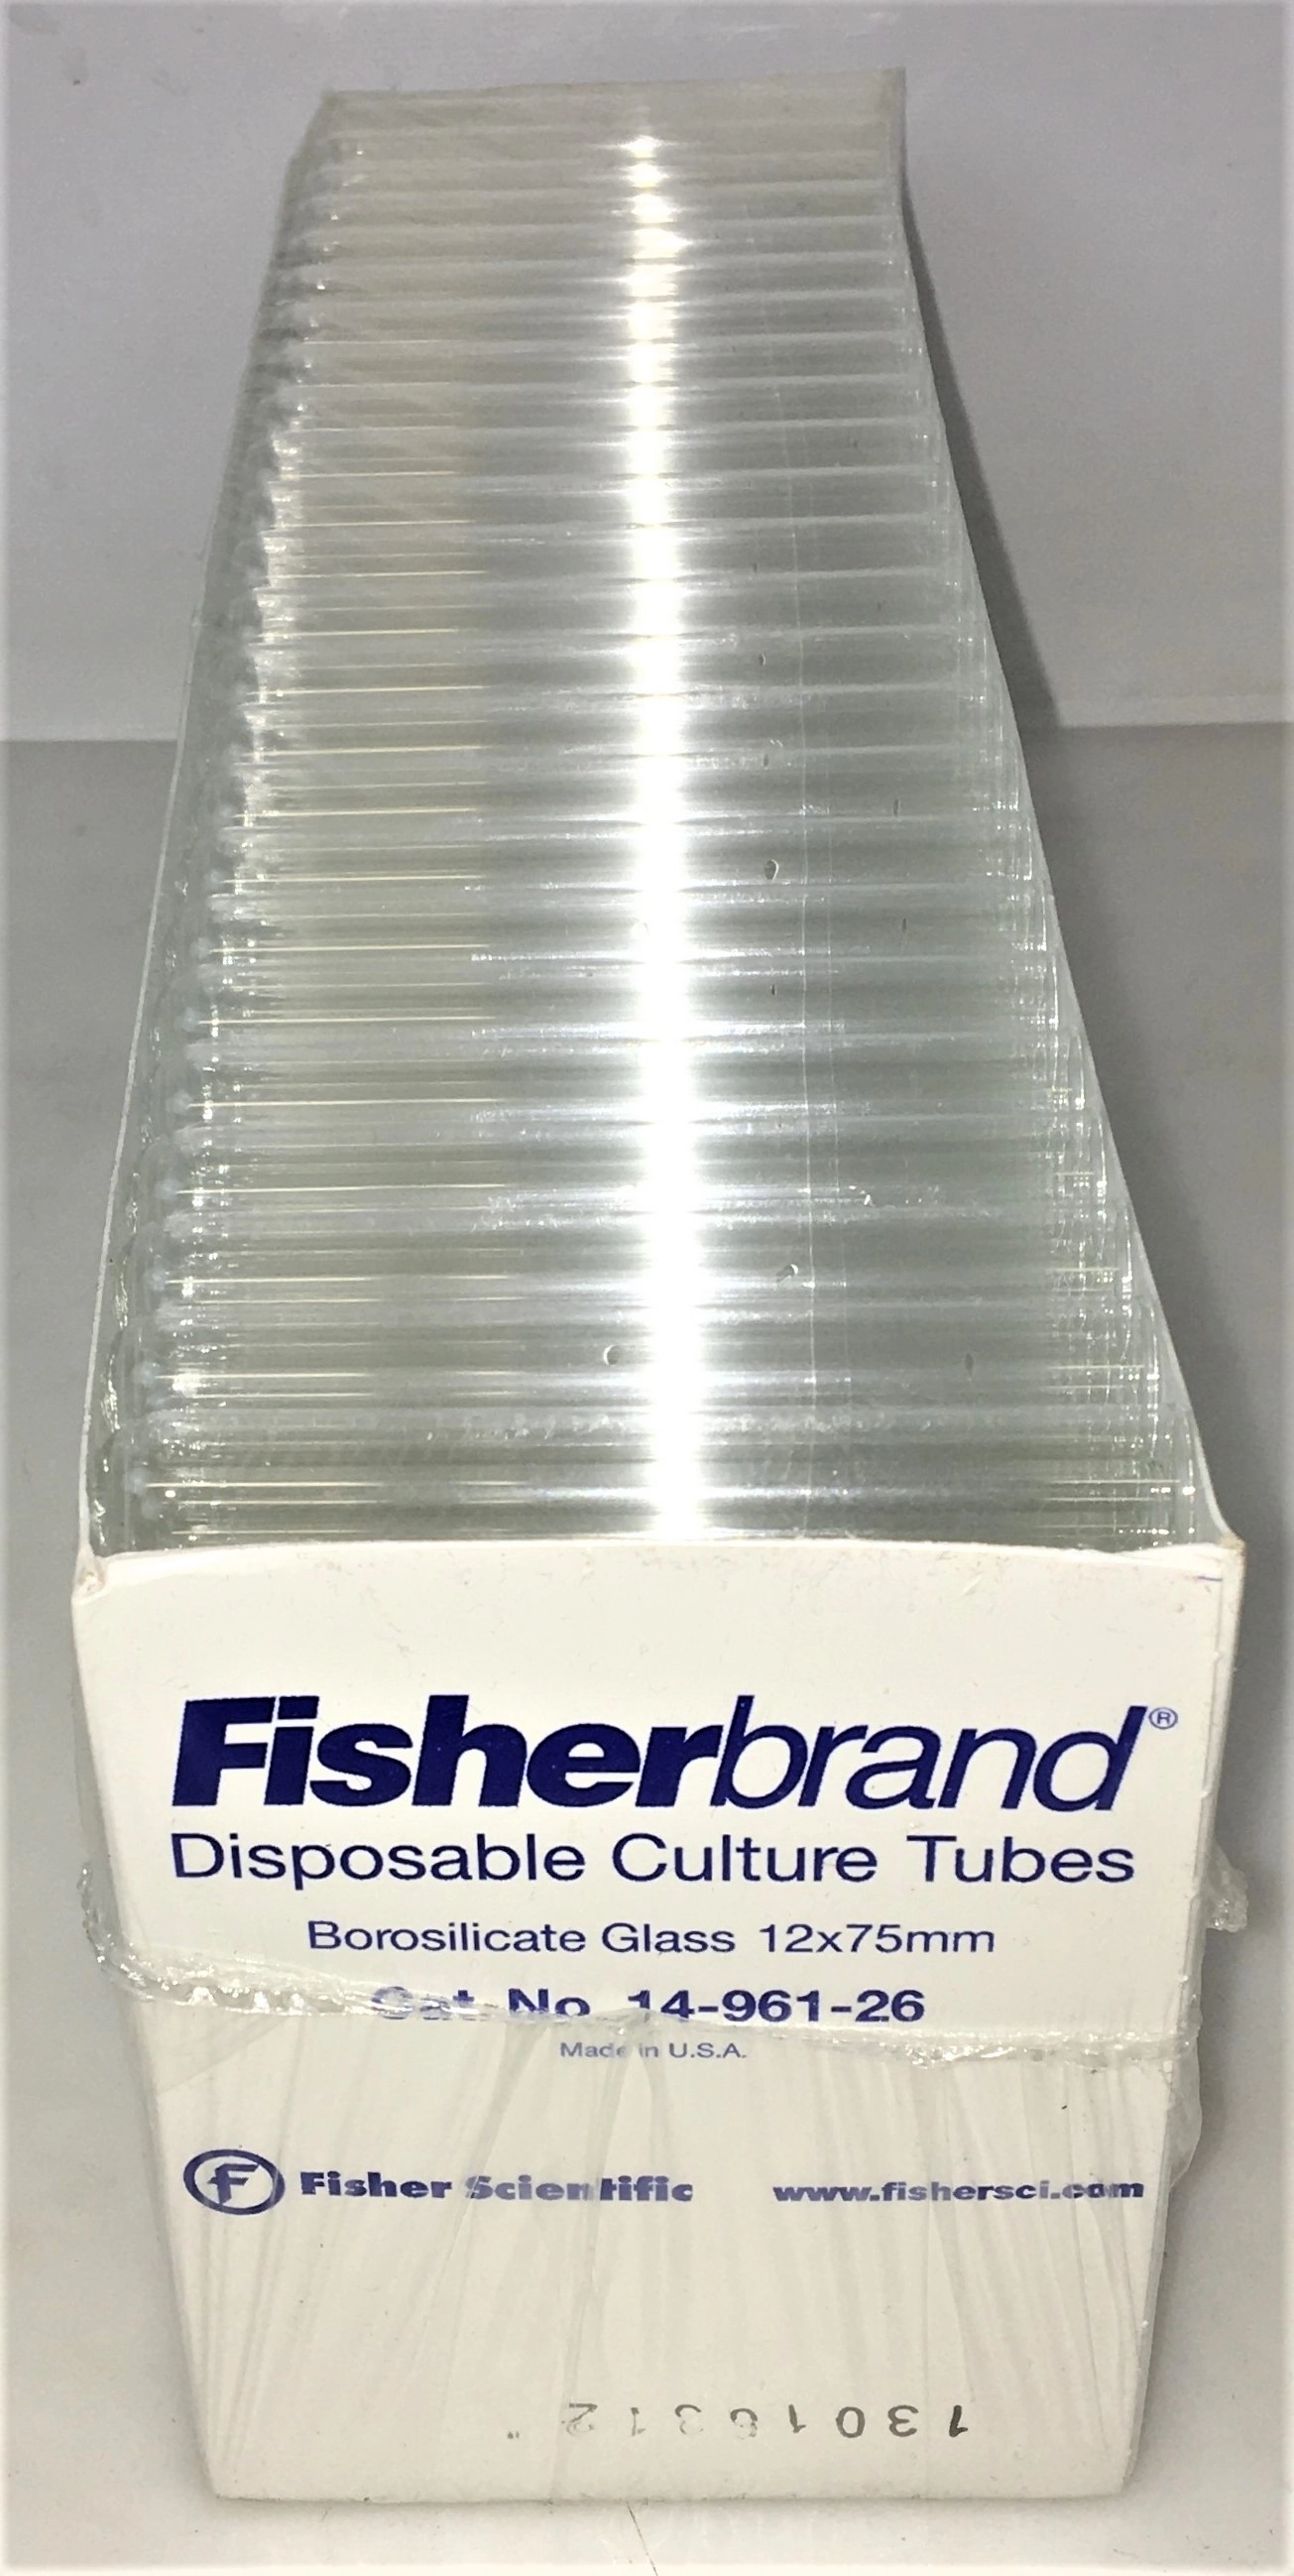 Fisherbrand 14-961-26 Disposable Culture Tube - 12 x 75mm (Box of 250)